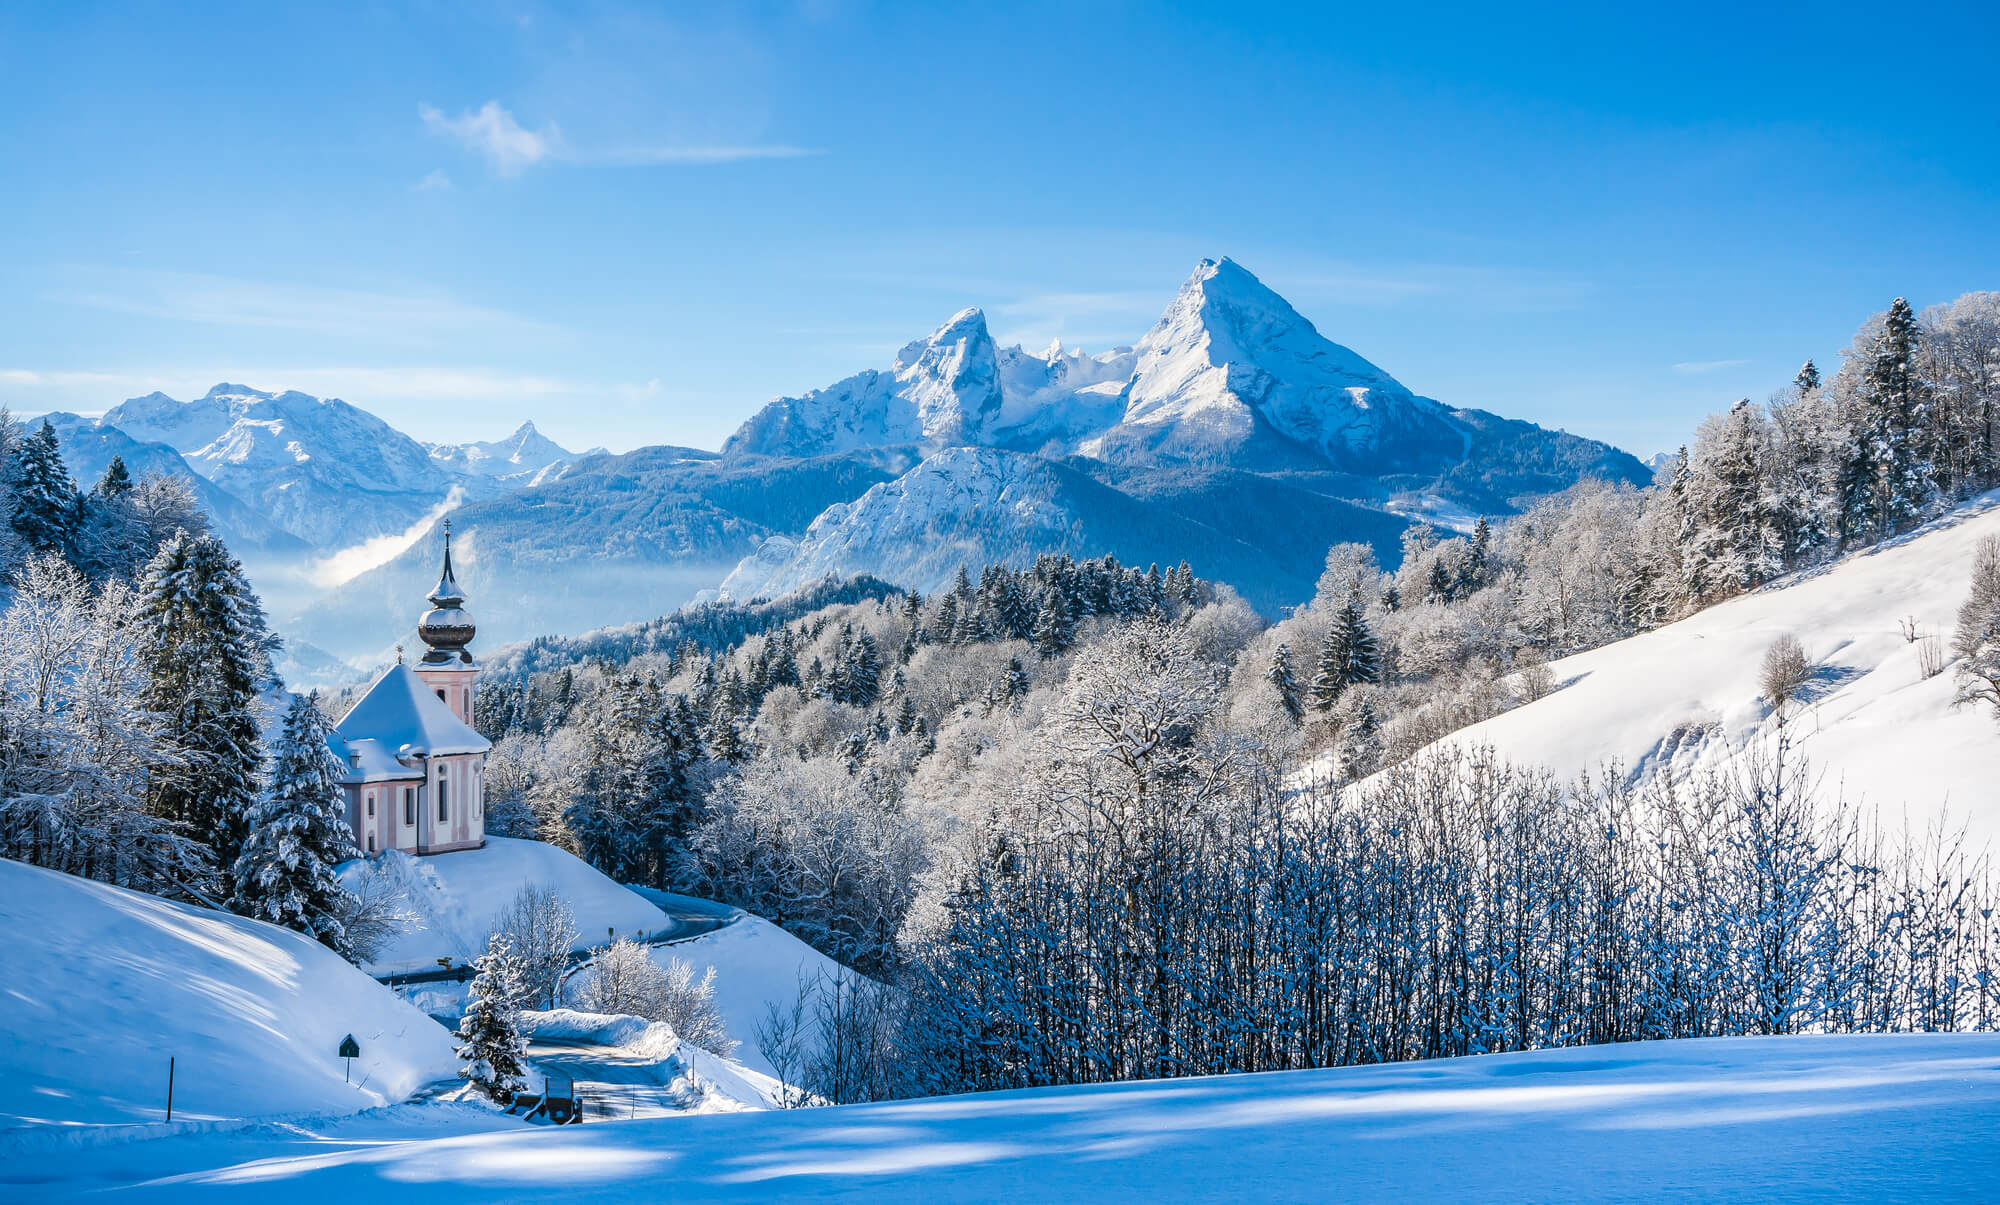 Austrian church on a snowy hilltop with mountains in the background